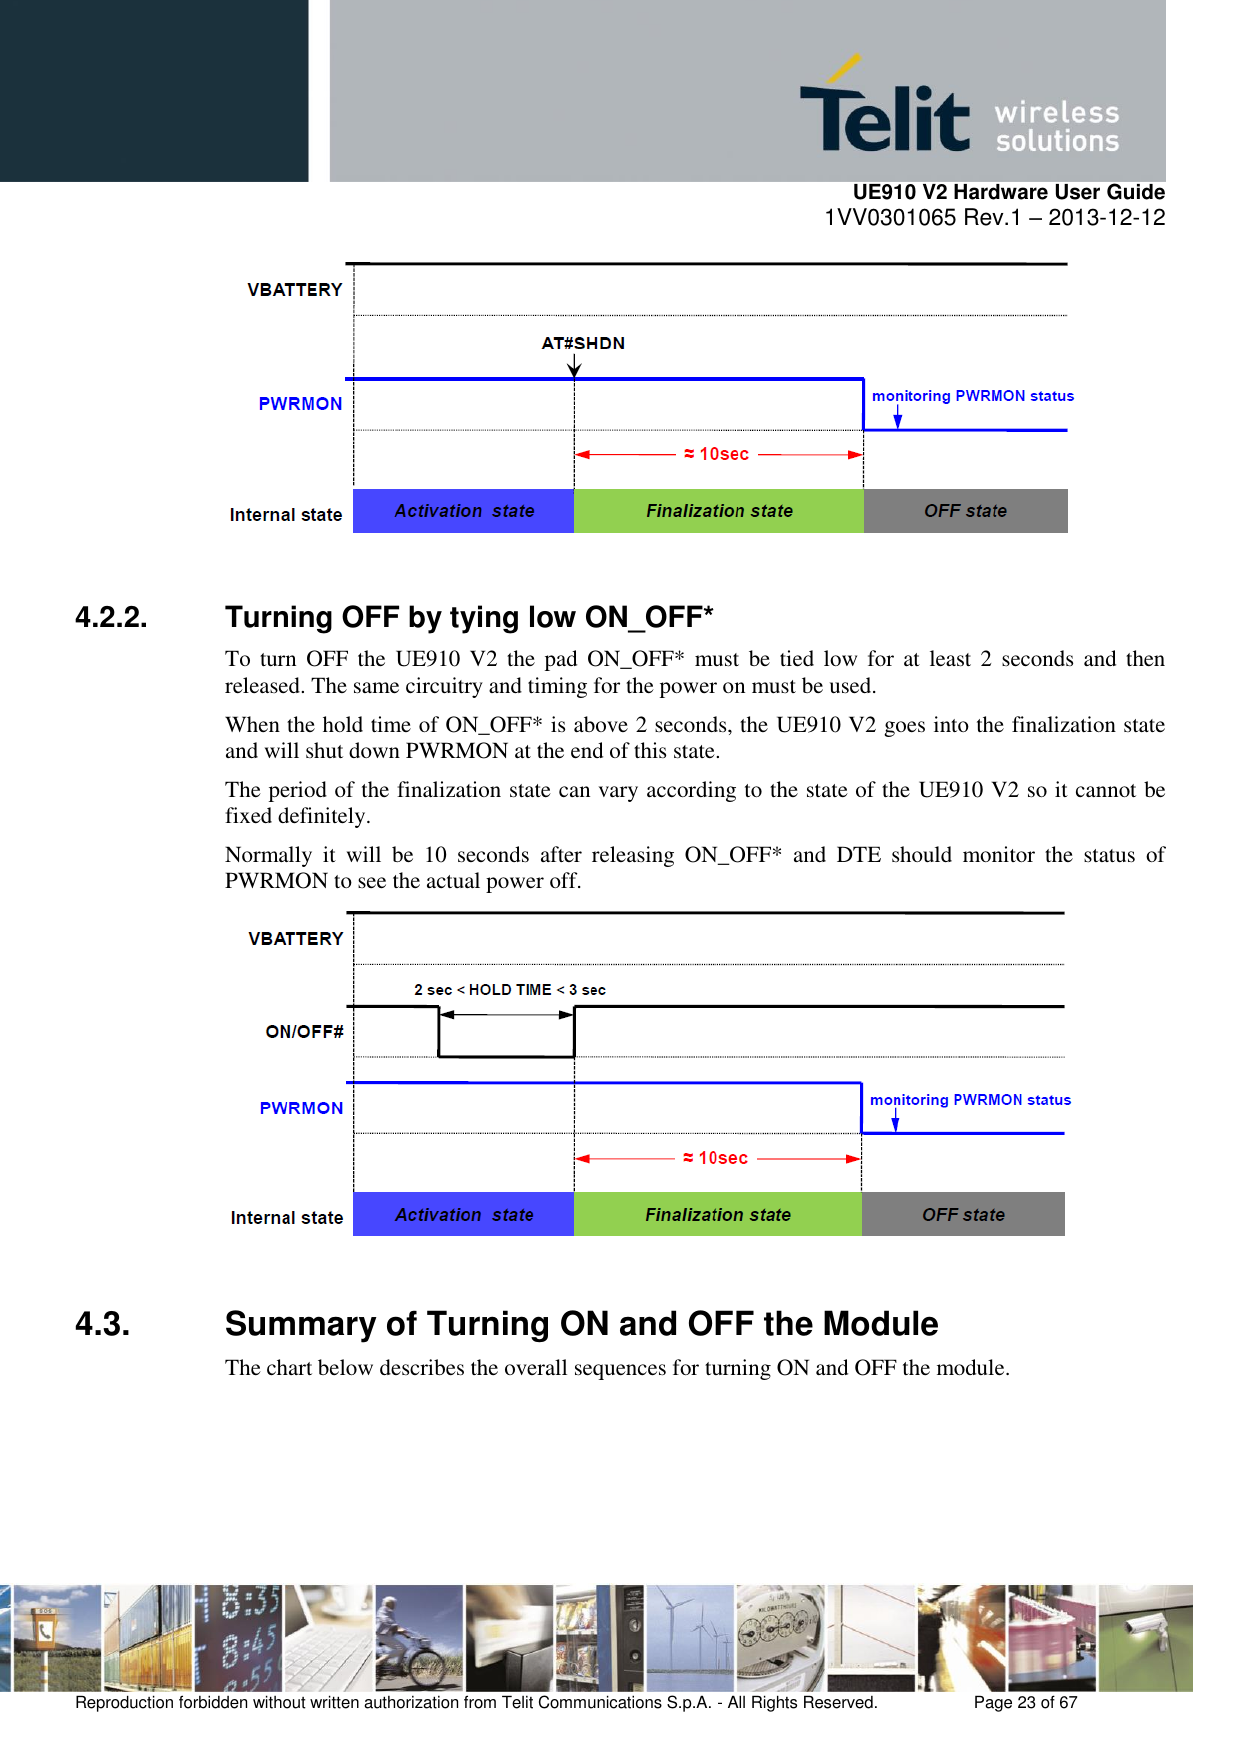     UE910 V2 Hardware User Guide 1VV0301065 Rev.1 – 2013-12-12  Reproduction forbidden without written authorization from Telit Communications S.p.A. - All Rights Reserved.    Page 23 of 67                                                       4.2.2.  Turning OFF by tying low ON_OFF* To  turn  OFF  the  UE910  V2 the  pad  ON_OFF*  must be  tied  low for  at  least 2  seconds  and  then released. The same circuitry and timing for the power on must be used. When the hold time of ON_OFF* is above 2 seconds, the UE910 V2 goes into the finalization state and will shut down PWRMON at the end of this state. The period of the finalization state can vary according to the state of the UE910 V2 so it cannot be fixed definitely. Normally  it  will  be  10  seconds  after  releasing  ON_OFF*  and  DTE  should  monitor  the  status  of PWRMON to see the actual power off.   4.3.  Summary of Turning ON and OFF the Module The chart below describes the overall sequences for turning ON and OFF the module.  